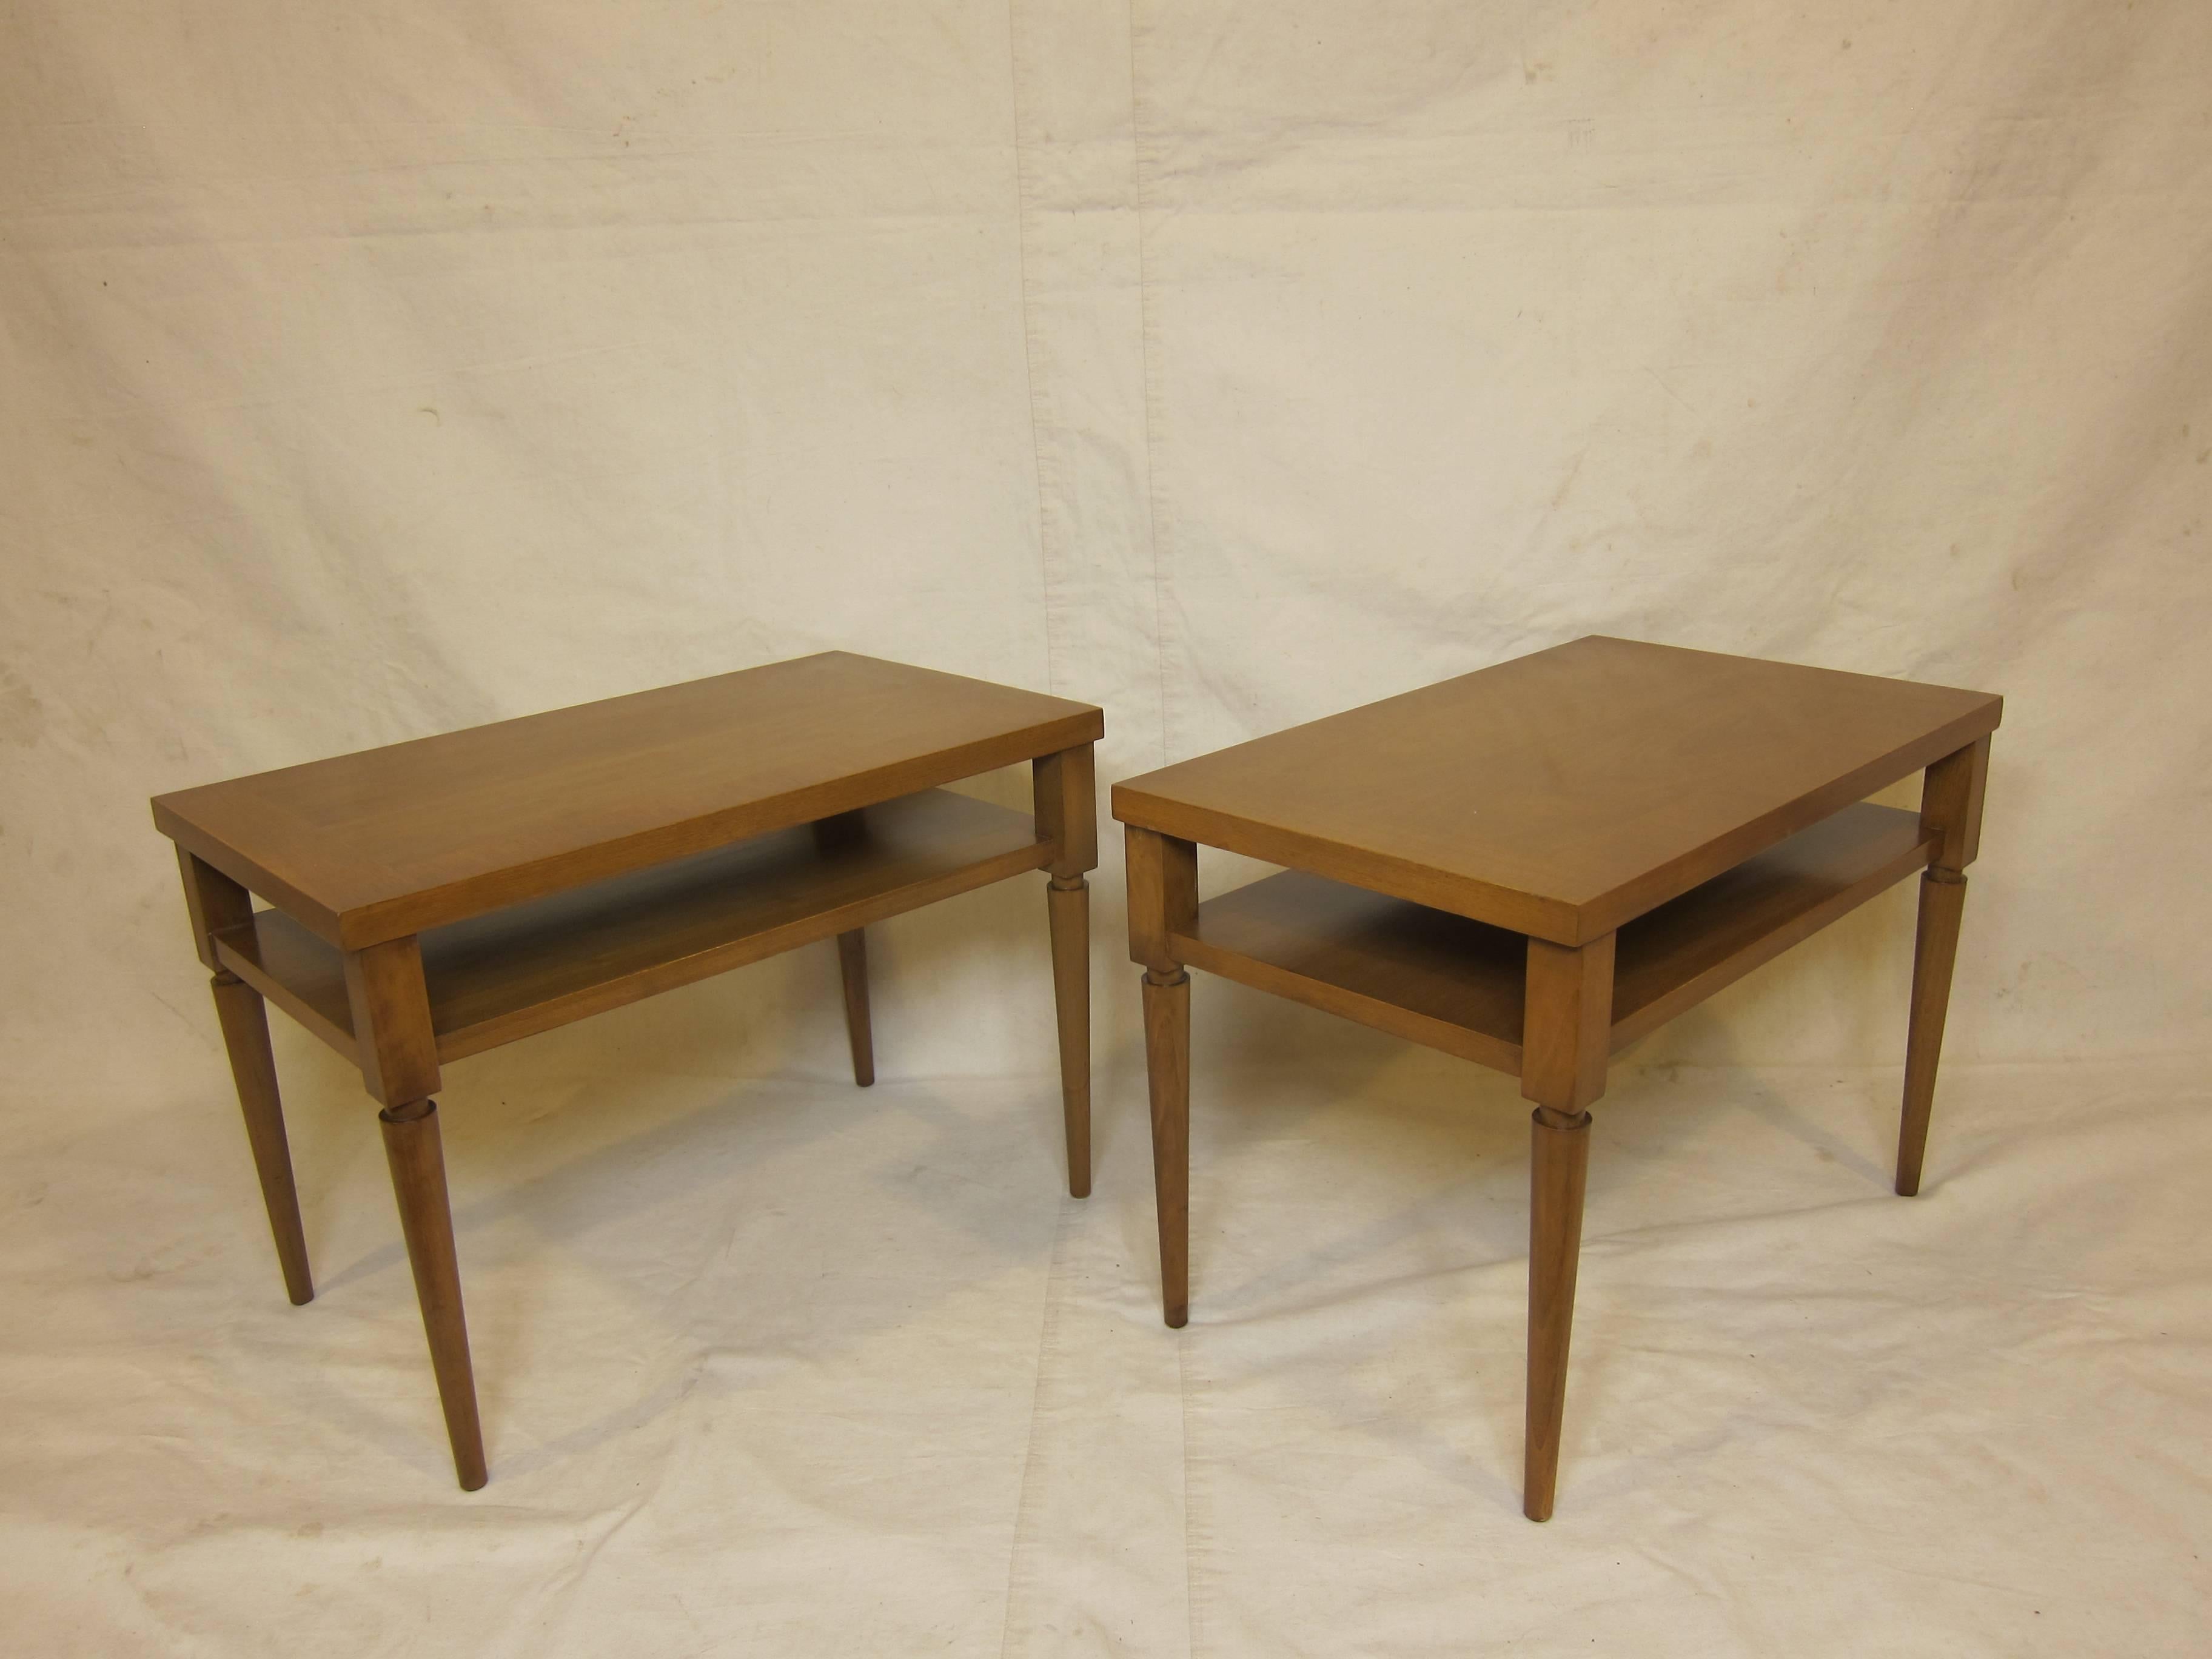 A pair of side tables with banded tops and shelfs designed by Robsjohn Gibbings made by Widdicomb.  Original color in excellent condition.   